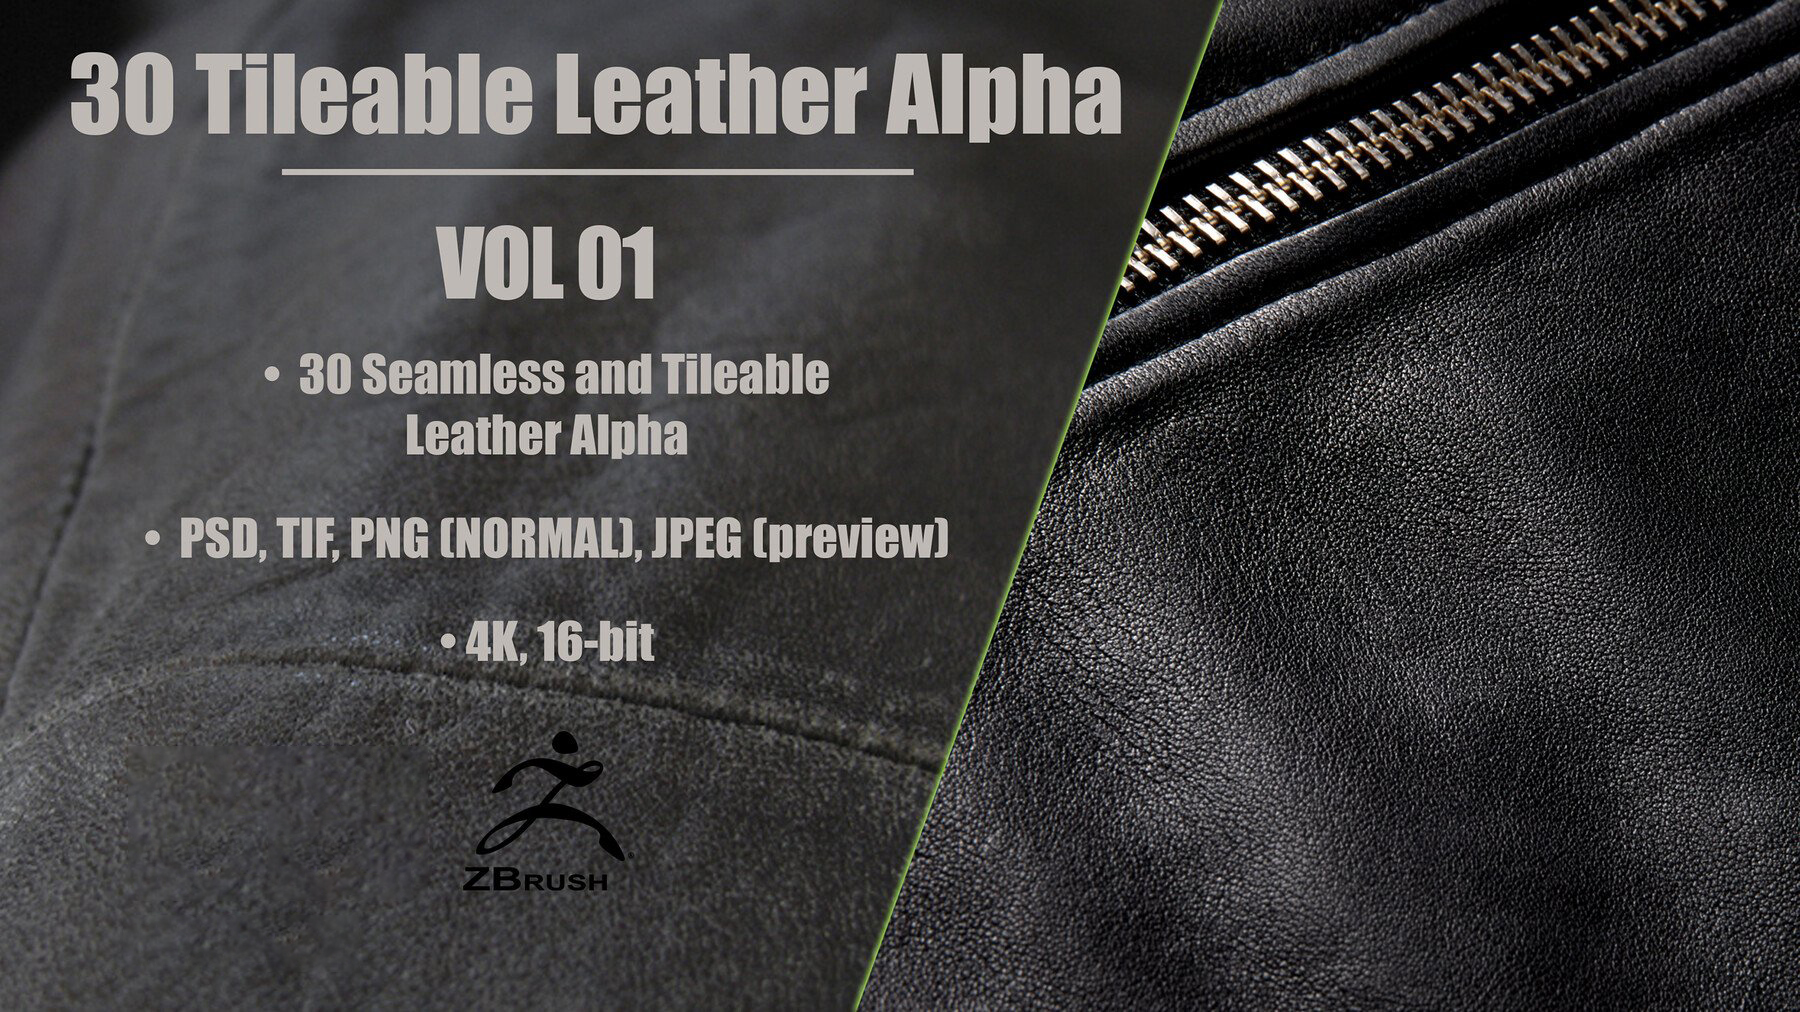 30 Leather Alphas (Seamless and Tileable - Vol 01)